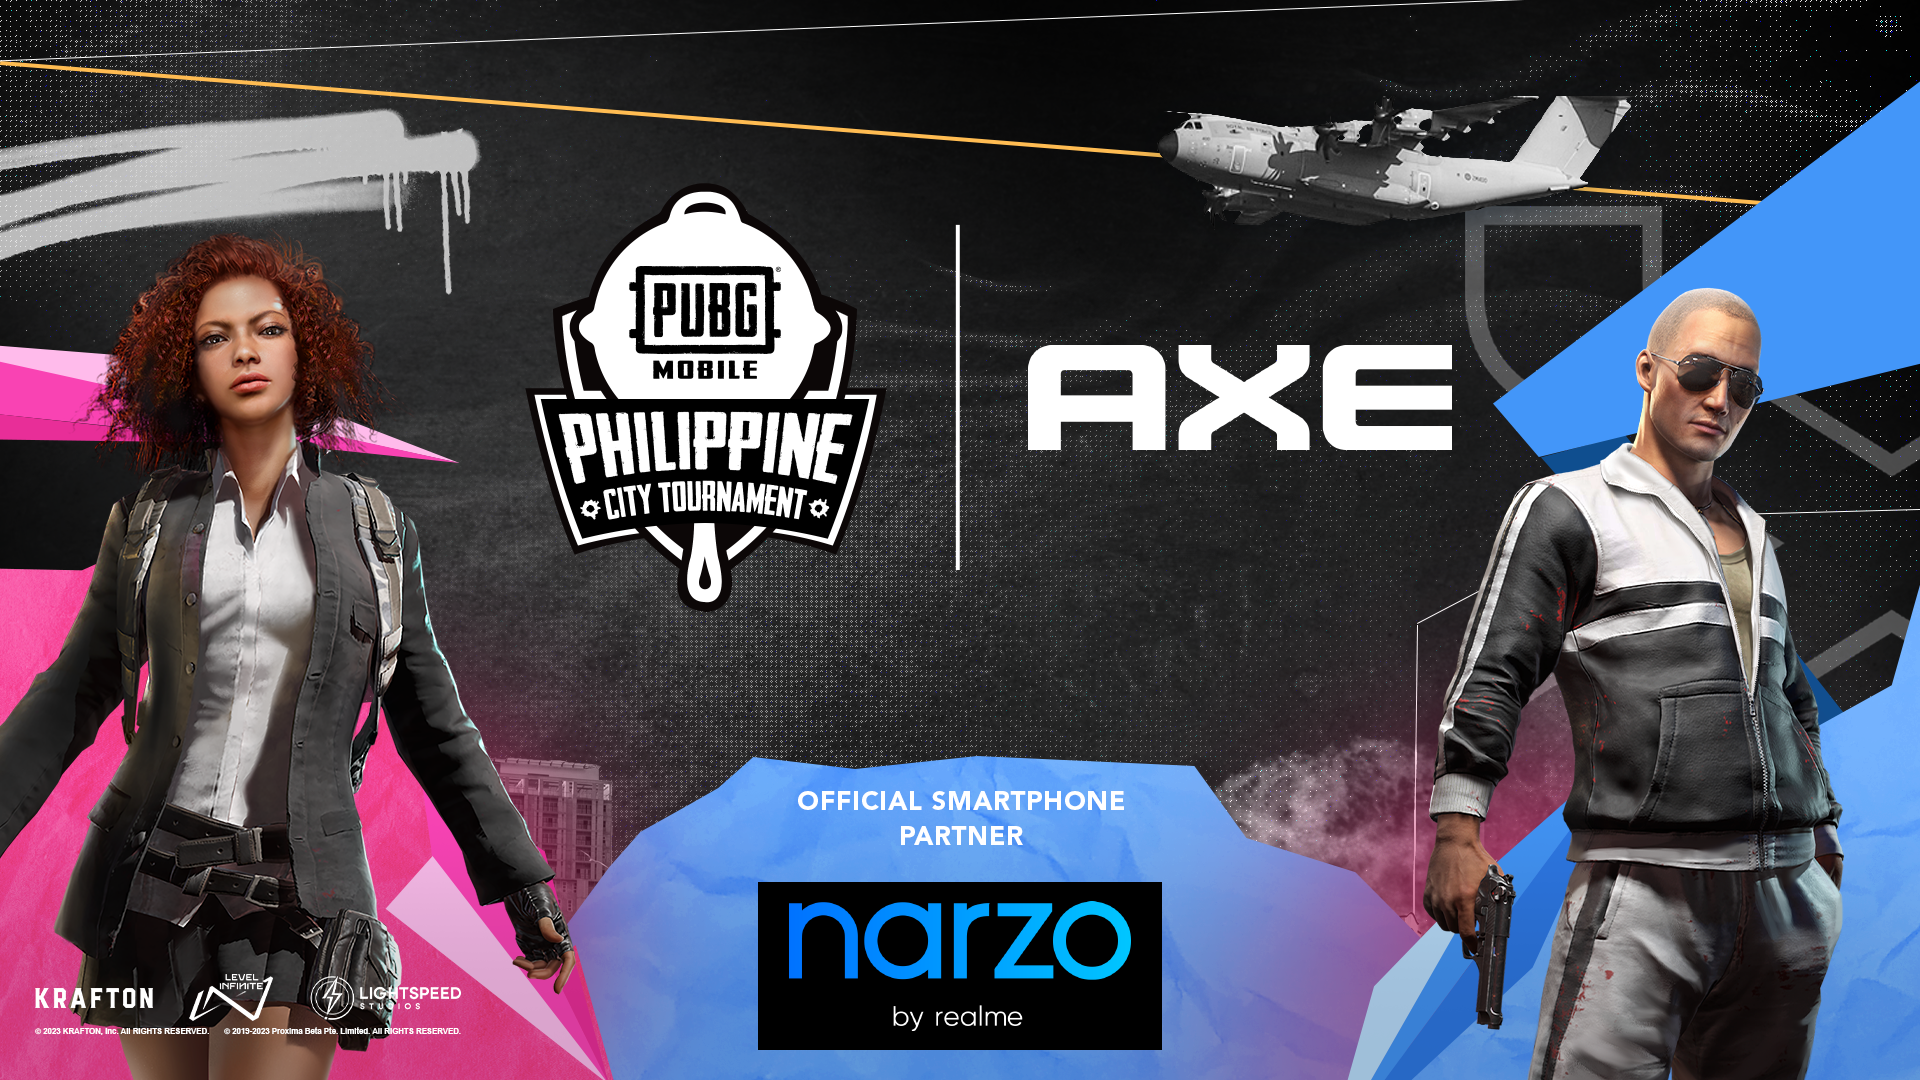 Nationwide Path to Pro Esports opens with PUBG Mobile City Tournament 2023 [PRESS RELEASE]